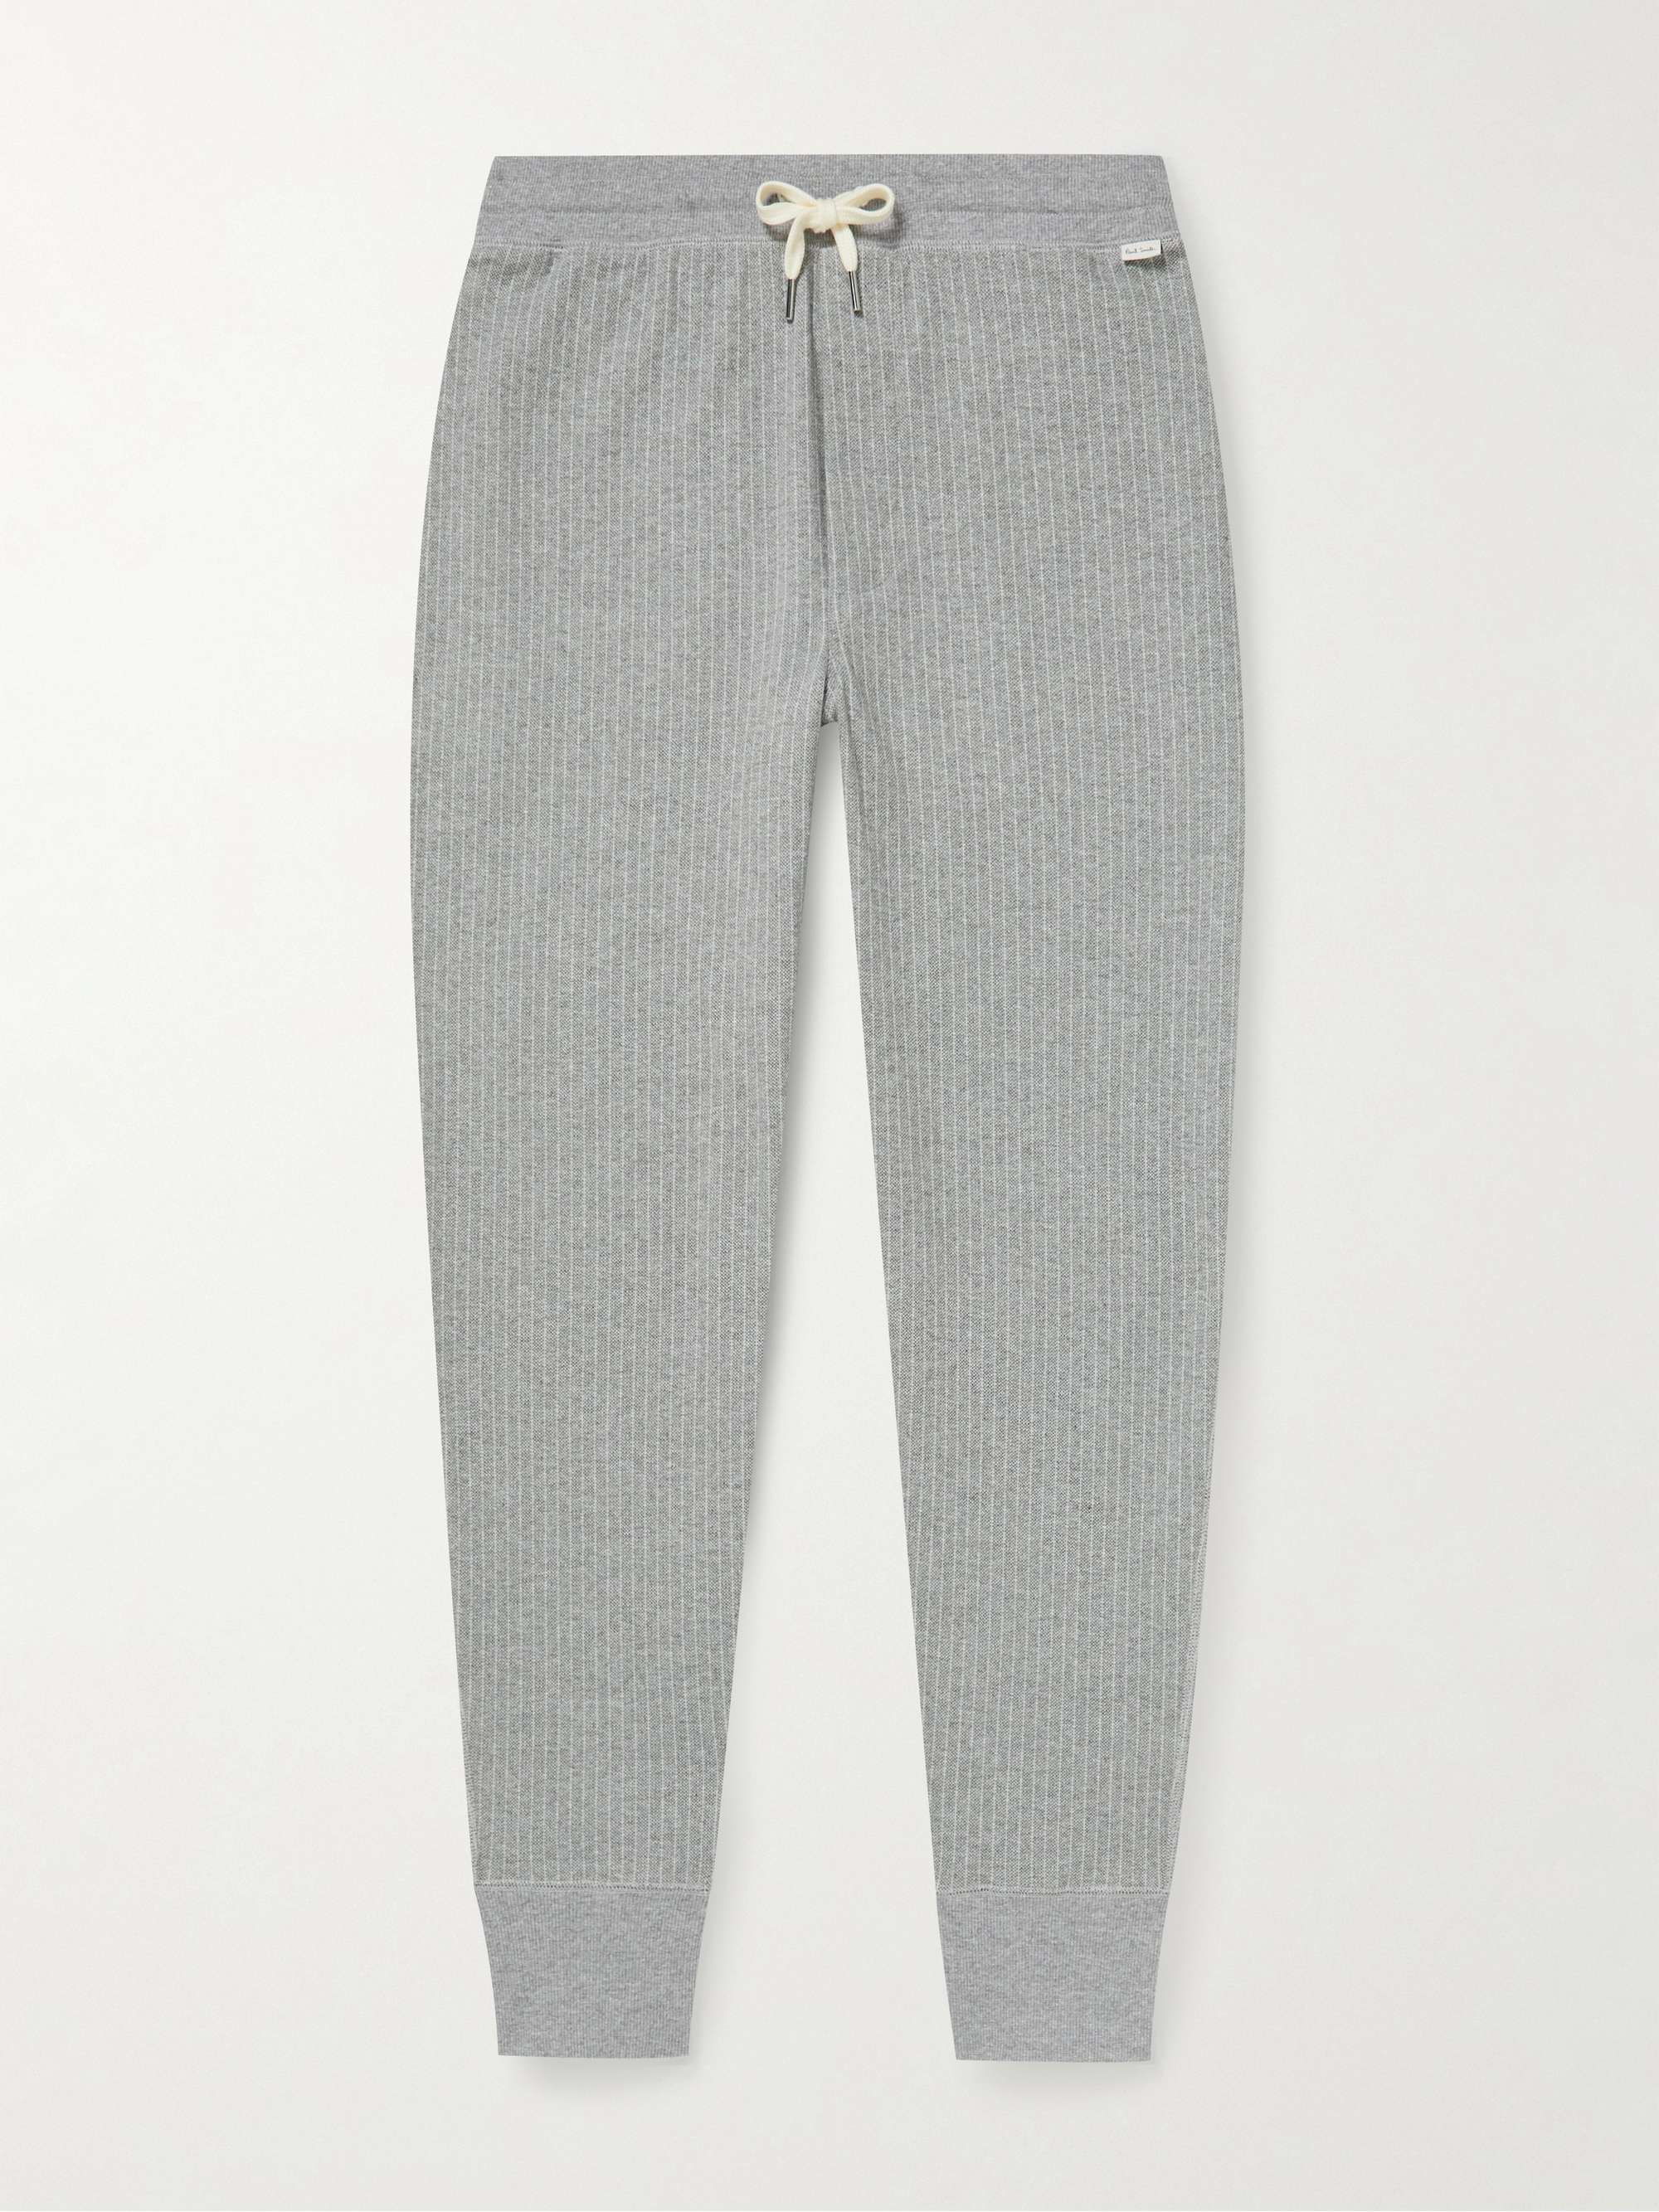 PAUL SMITH Tapered Striped Cotton-Jersey Sweatpants